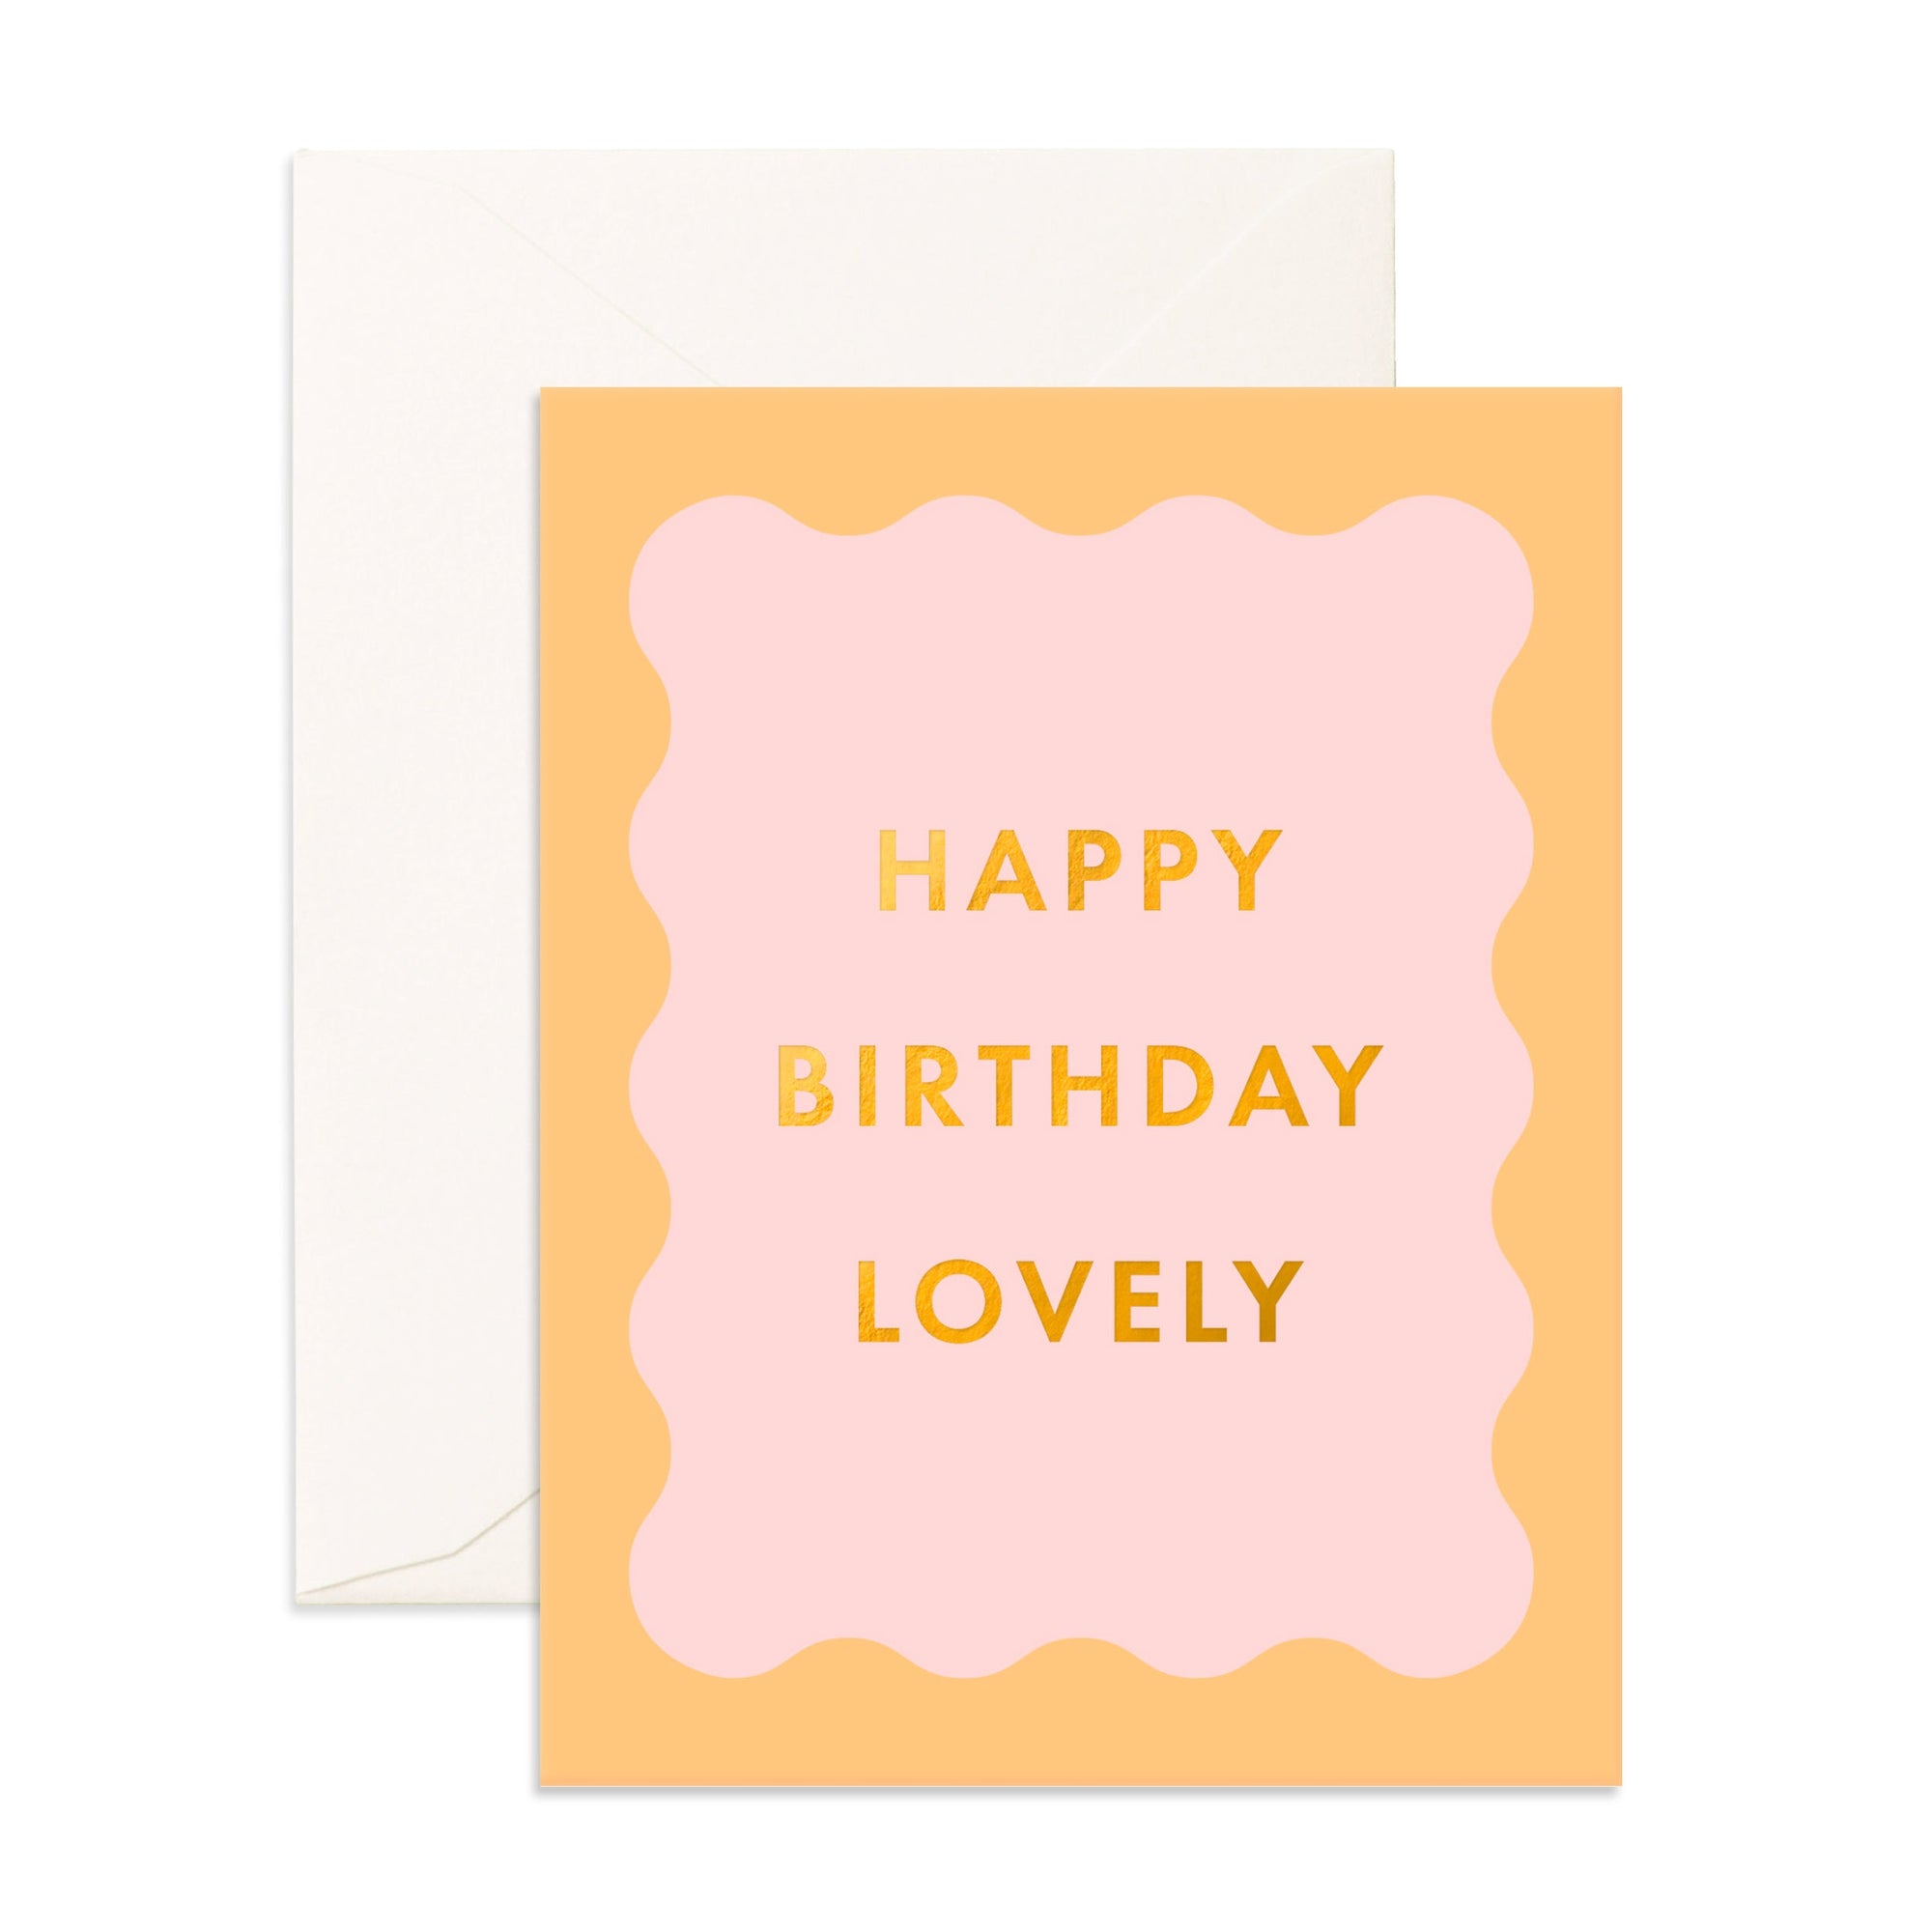 Birthday Lovely Wiggle Frame | Greeting Card